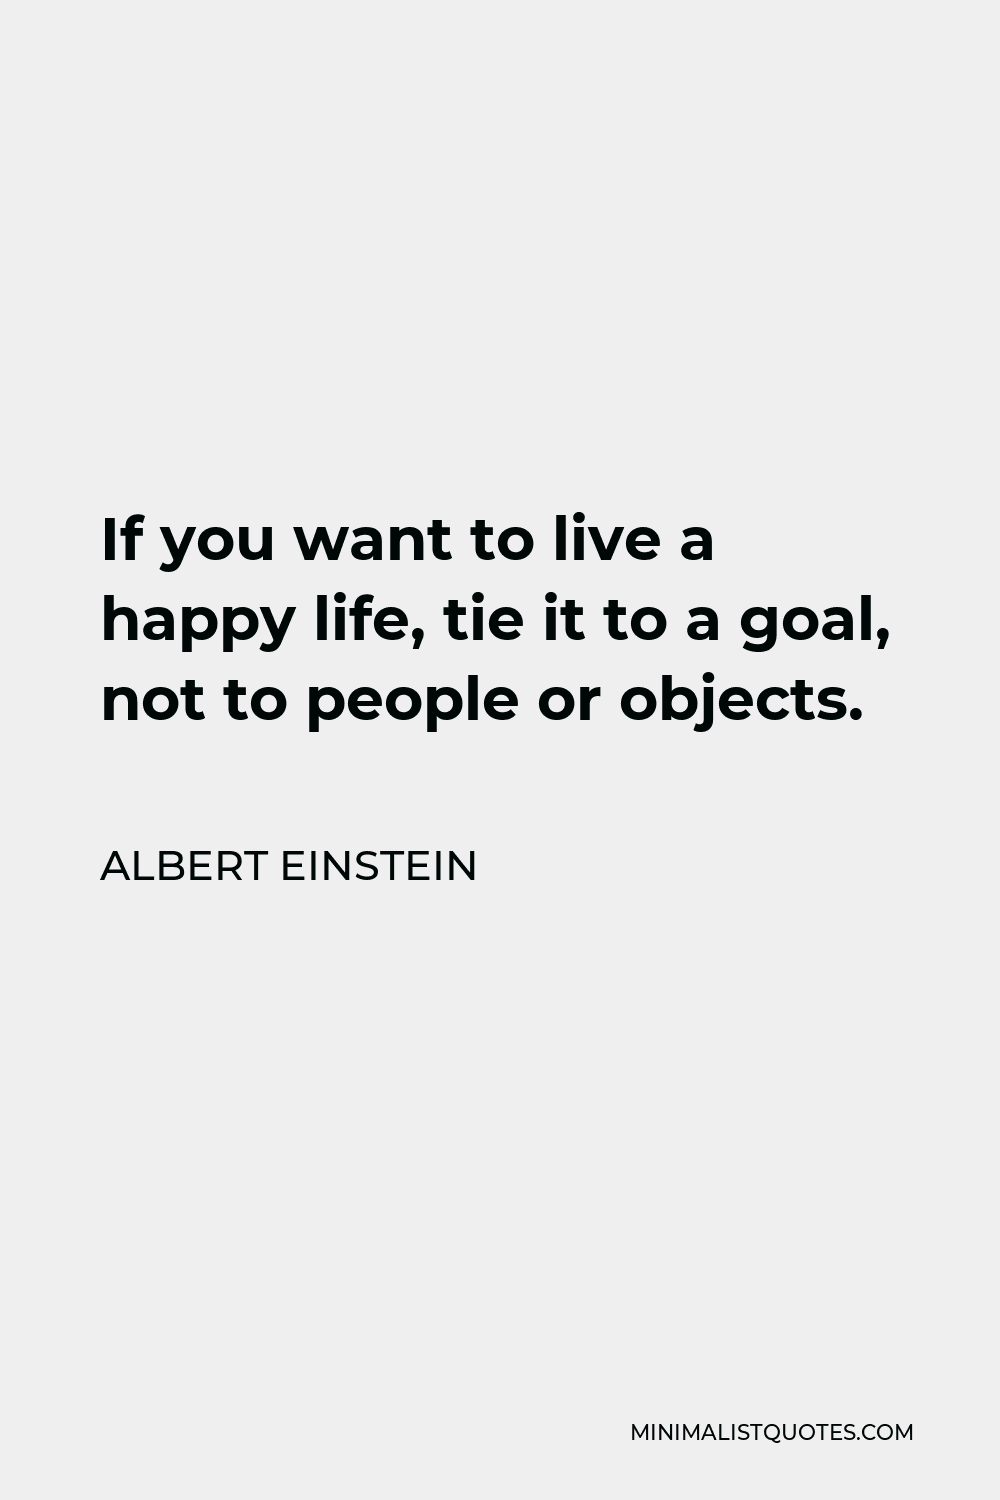 Albert Einstein Quote - If you want to live a happy life, tie it to a goal, not to people or objects.